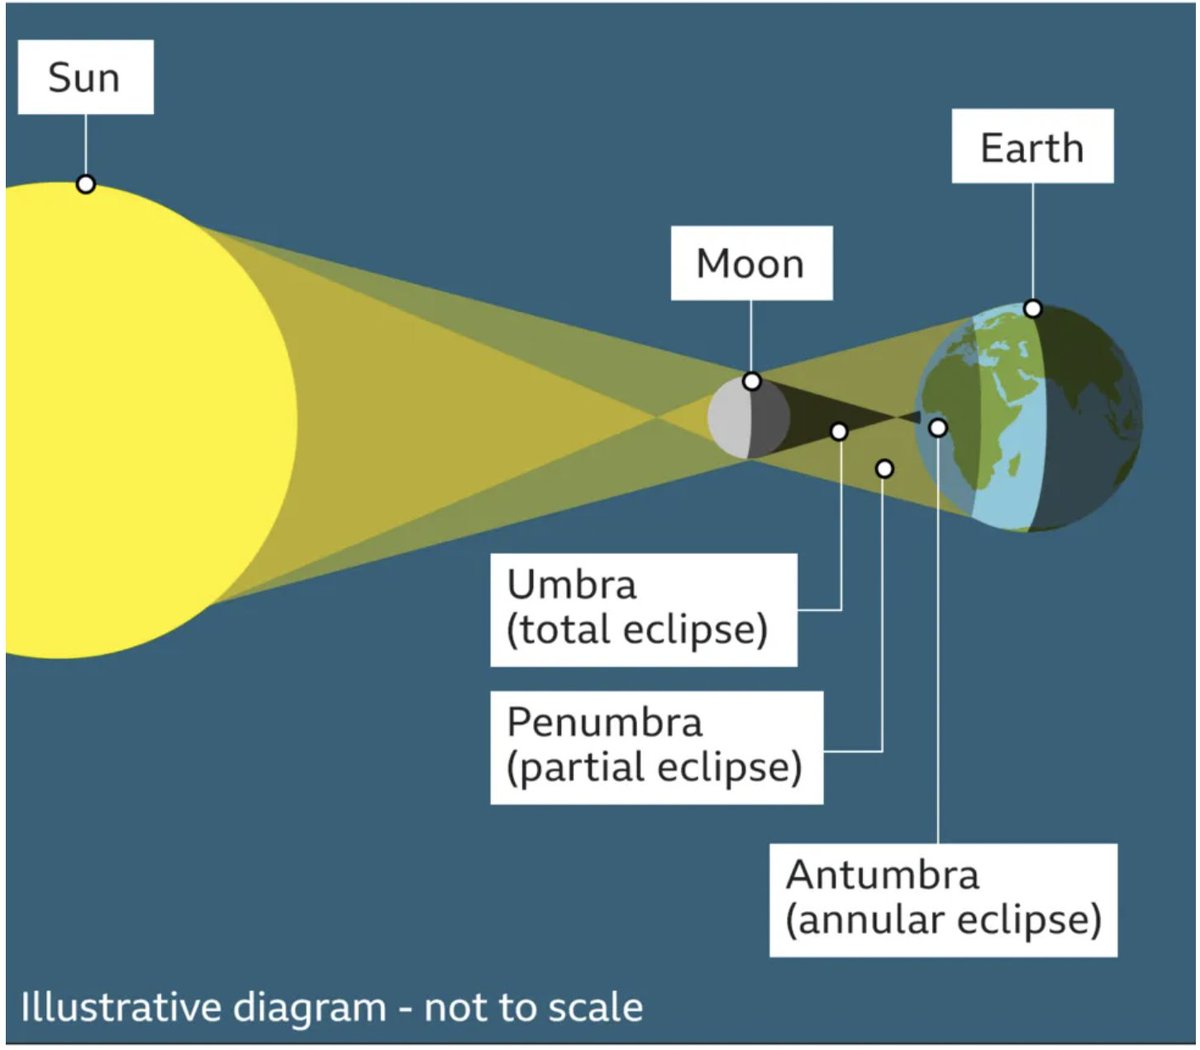 On April 8th there will be a total eclipse visible to millions in the US. This diagram from a @BBCNews article about it should help to consolidate any confusion you might have about how total eclipses work.